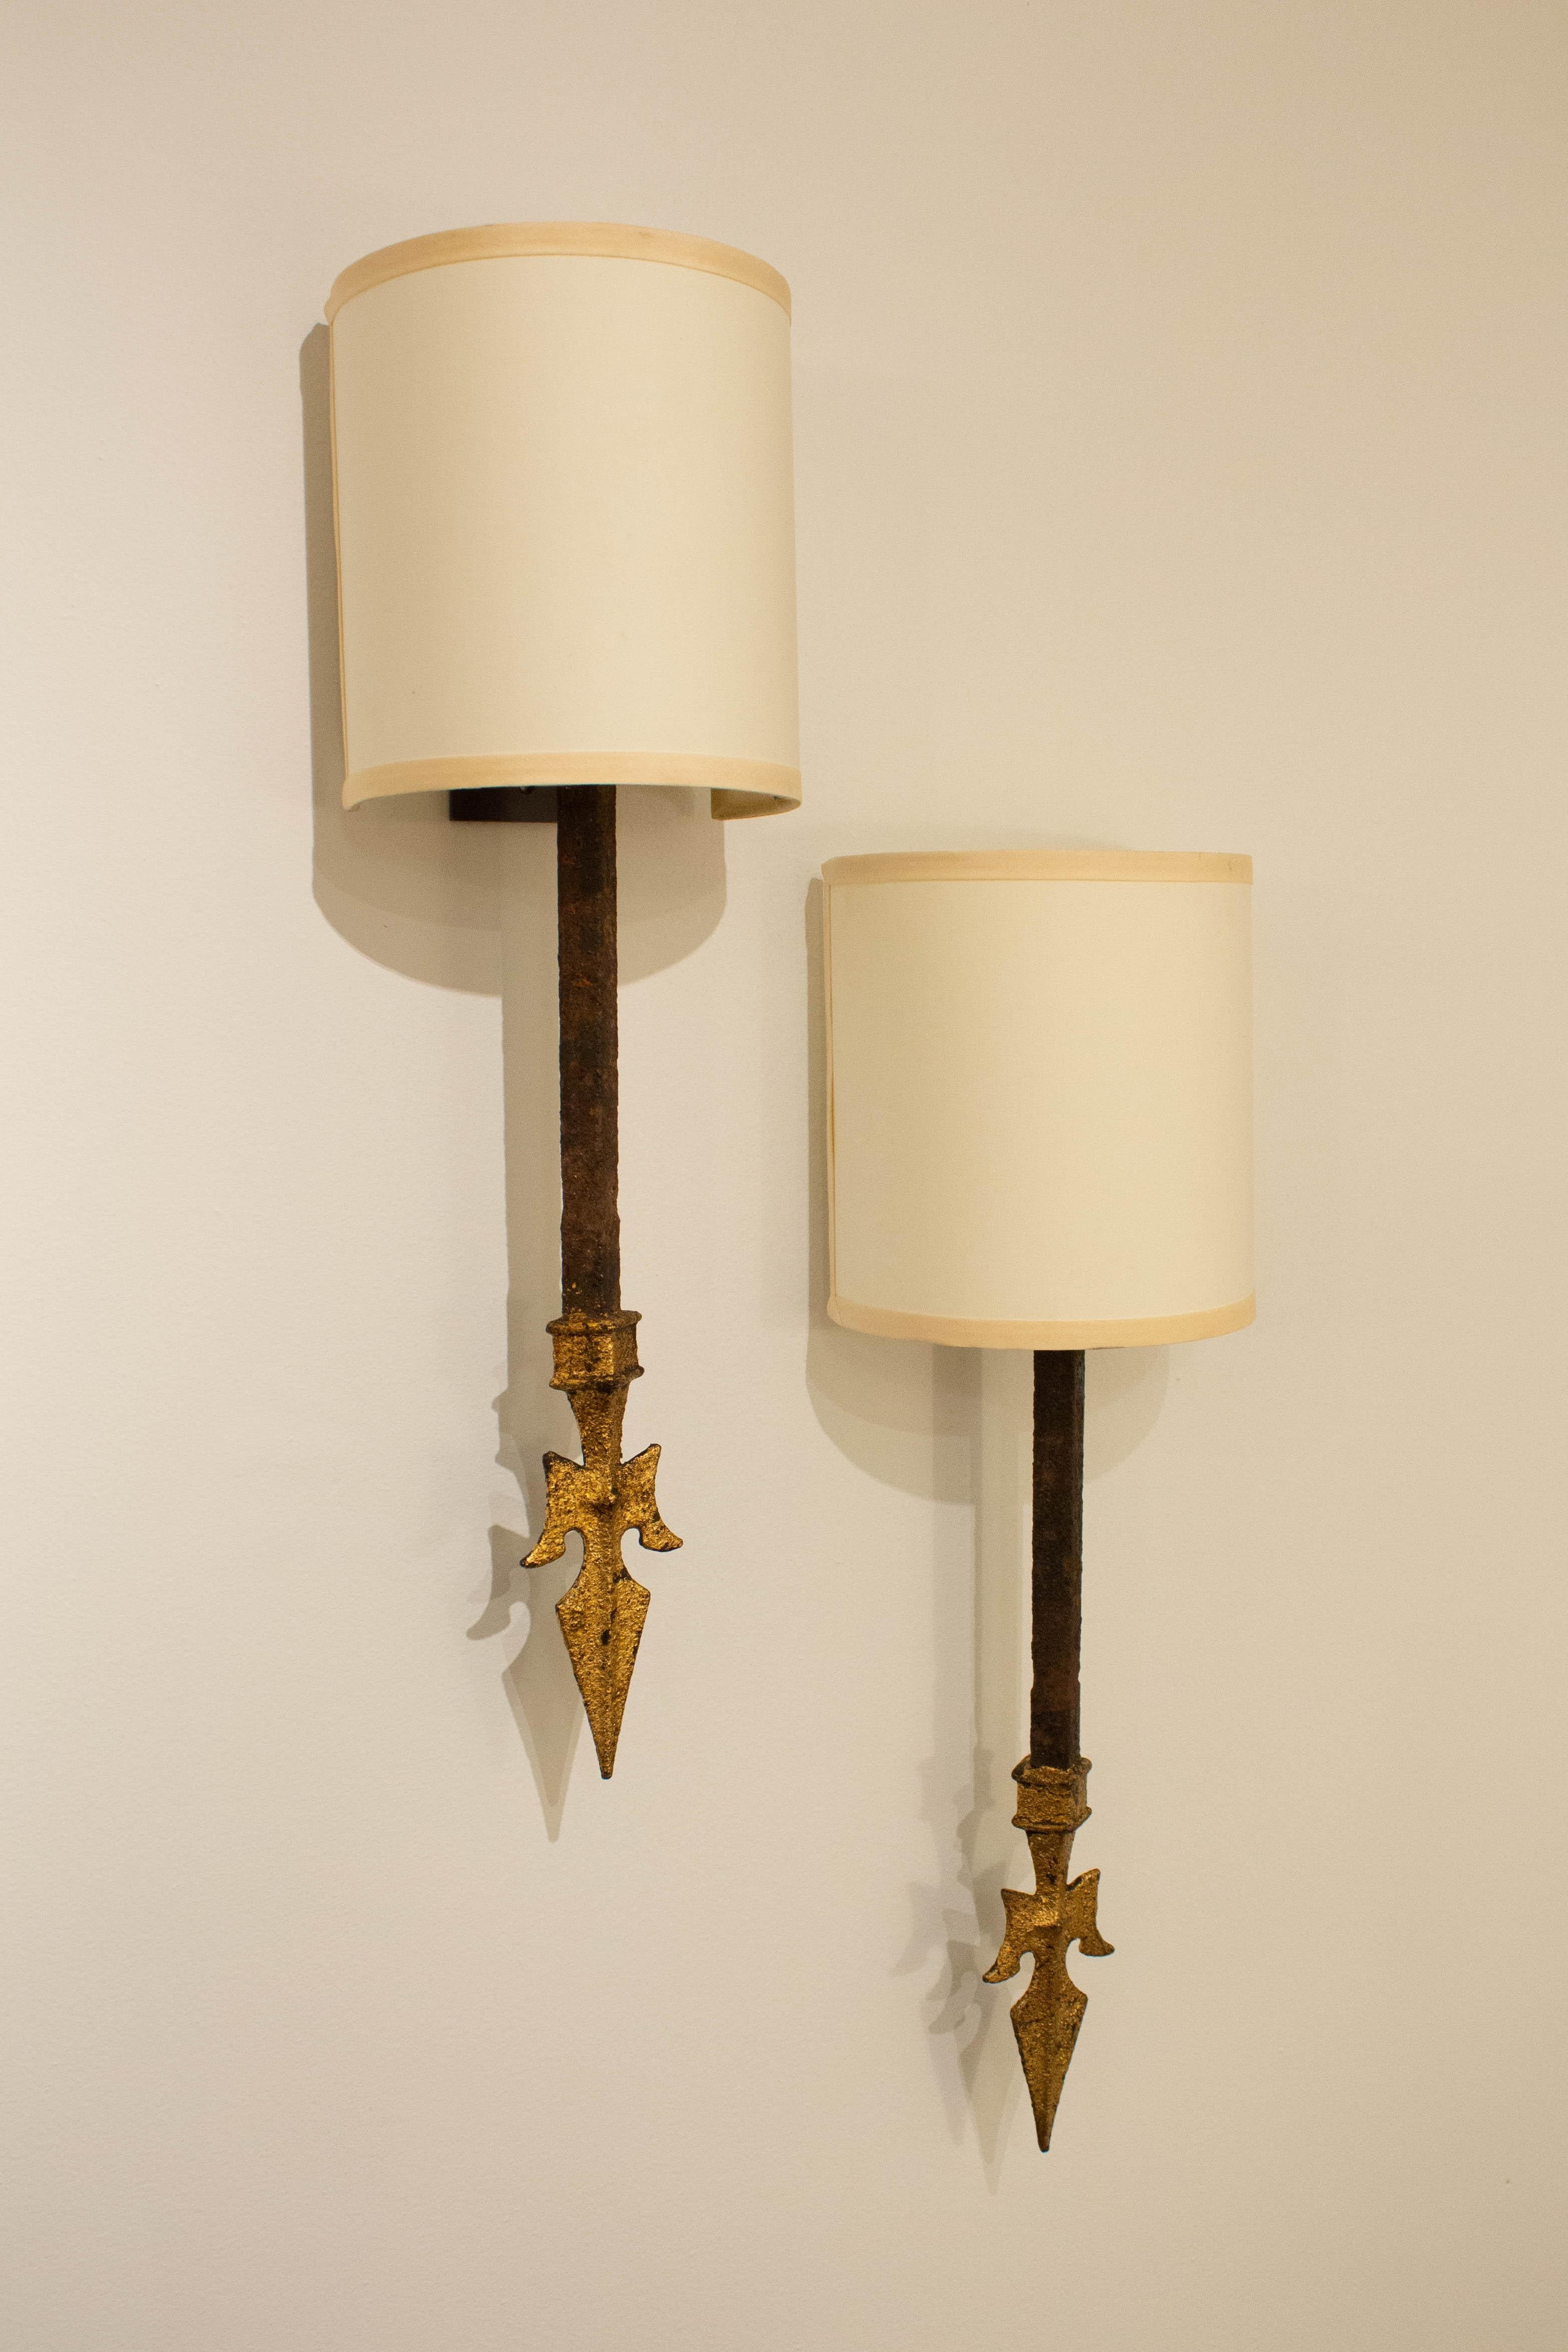 Gothic Revival Spear Point Wrought Iron Wall Sconces - a Pair For Sale